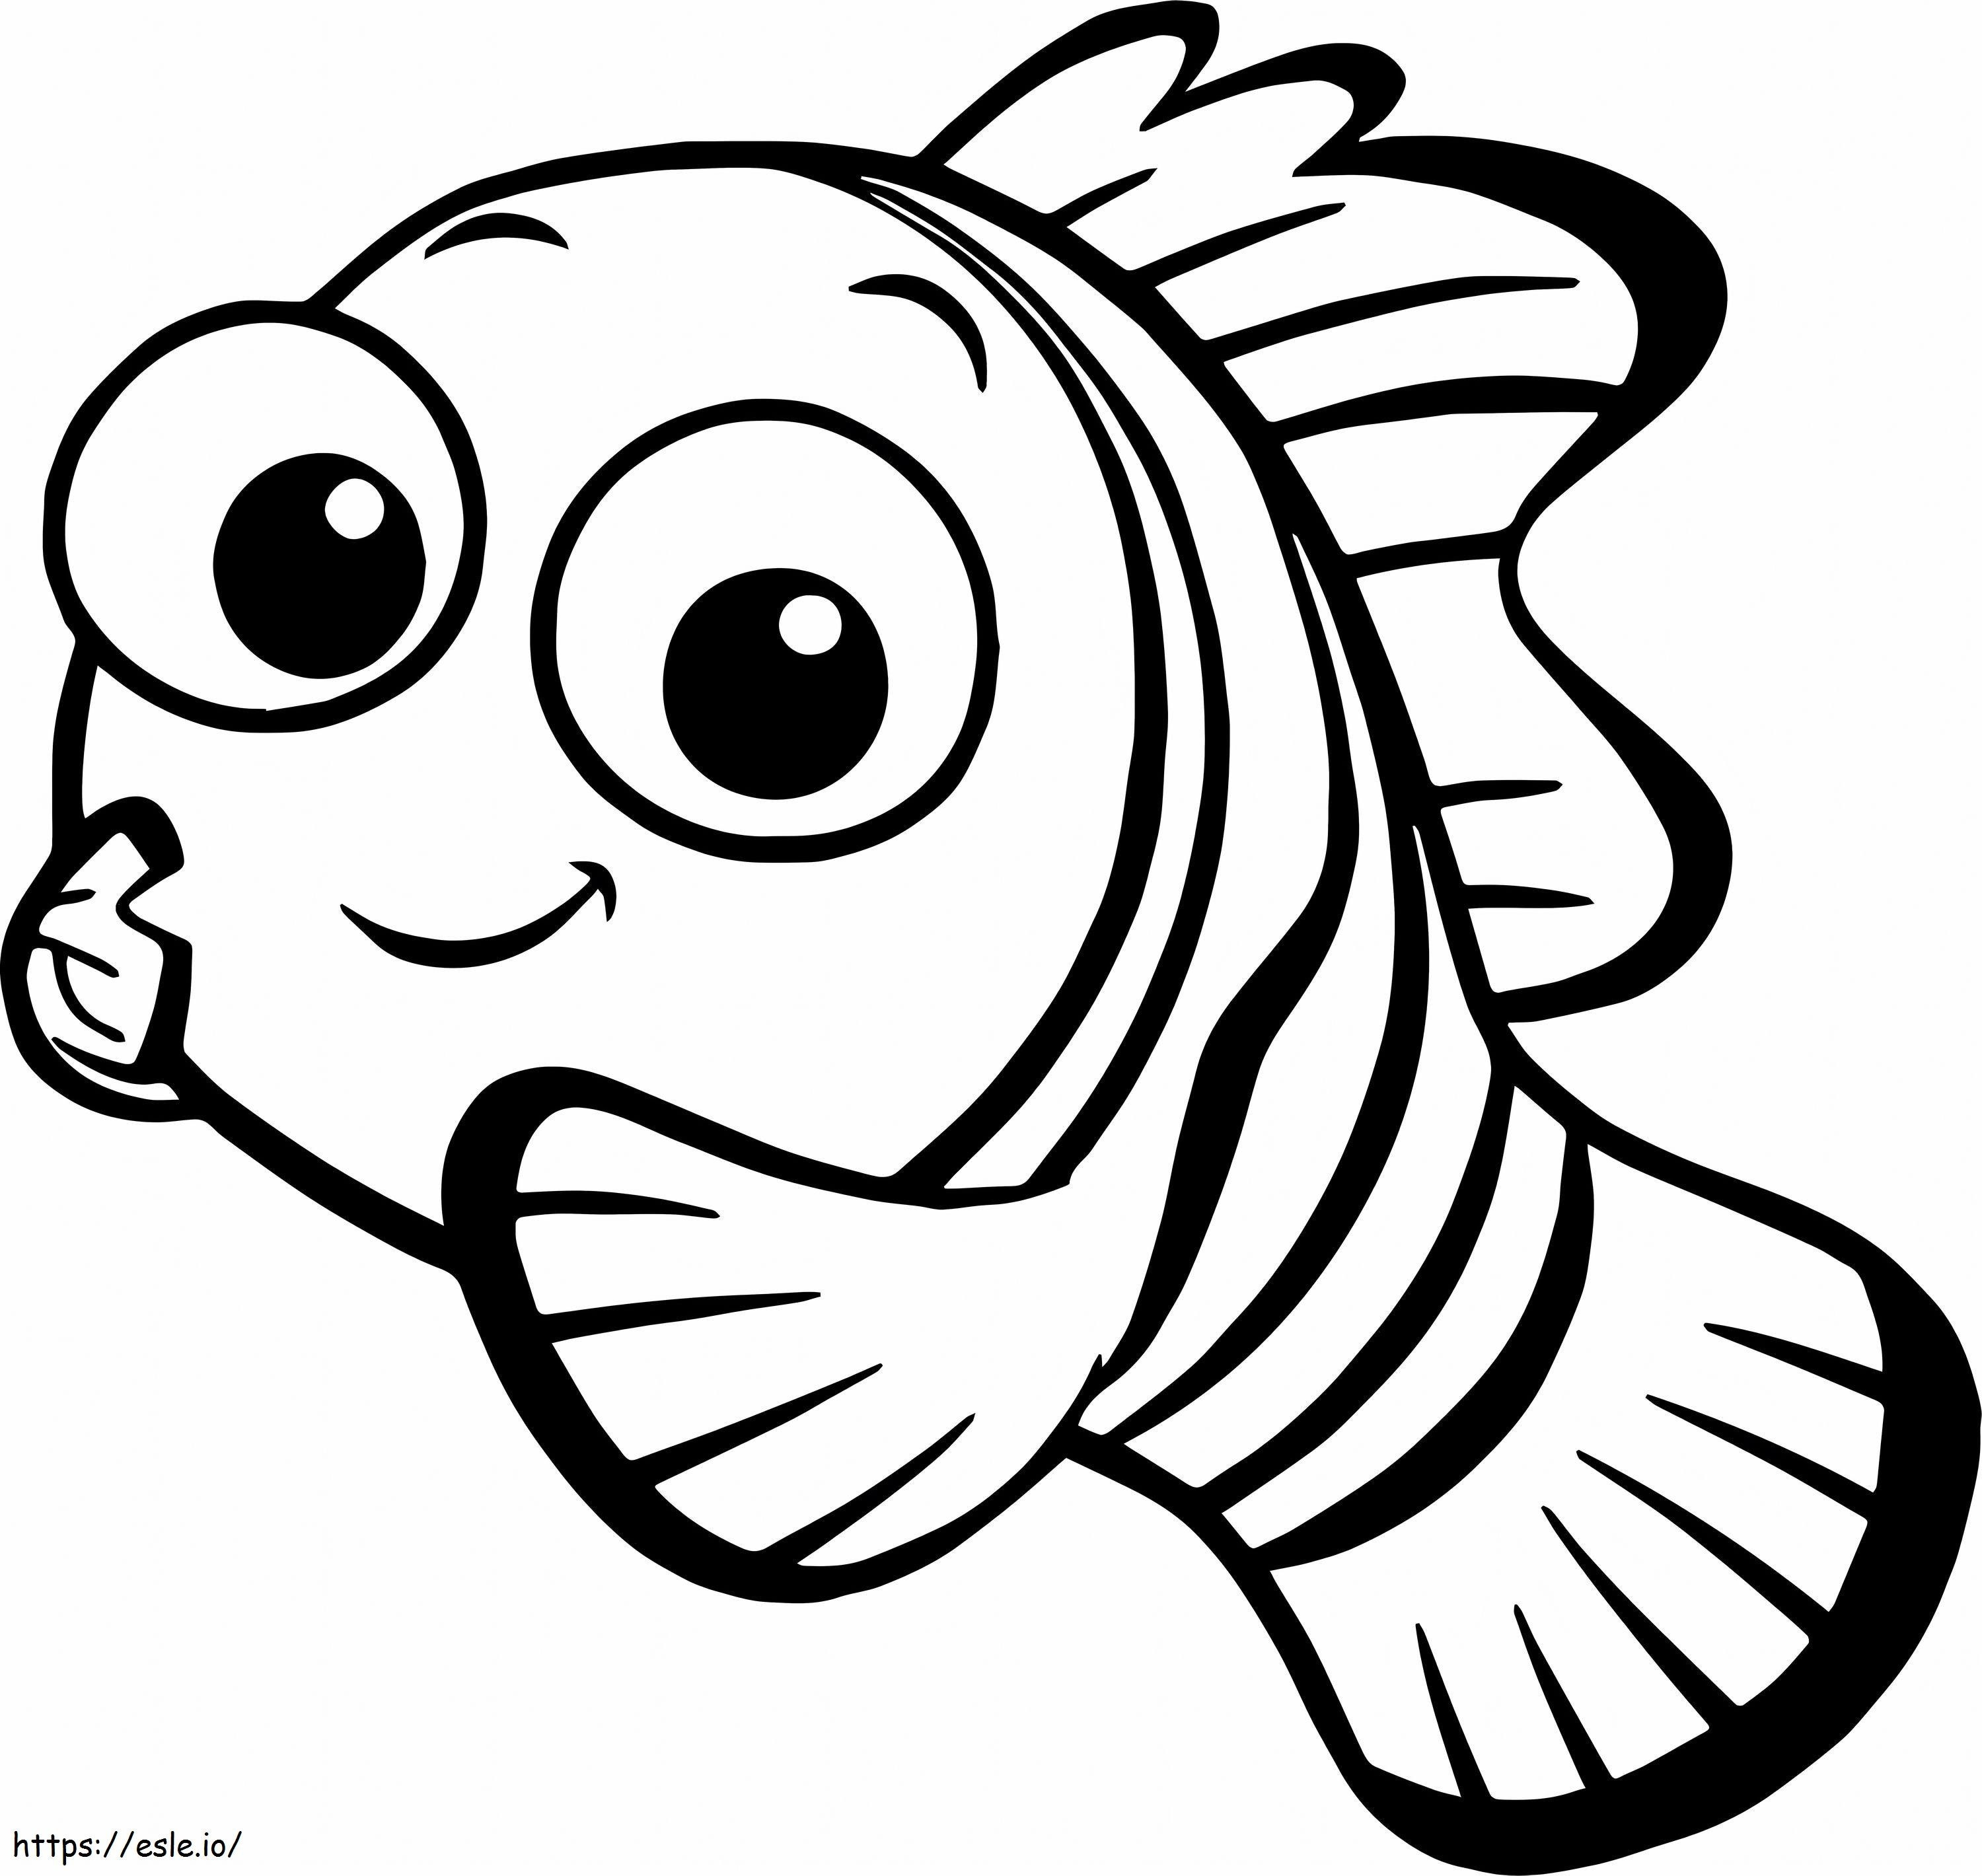 Nemo Smiling coloring page